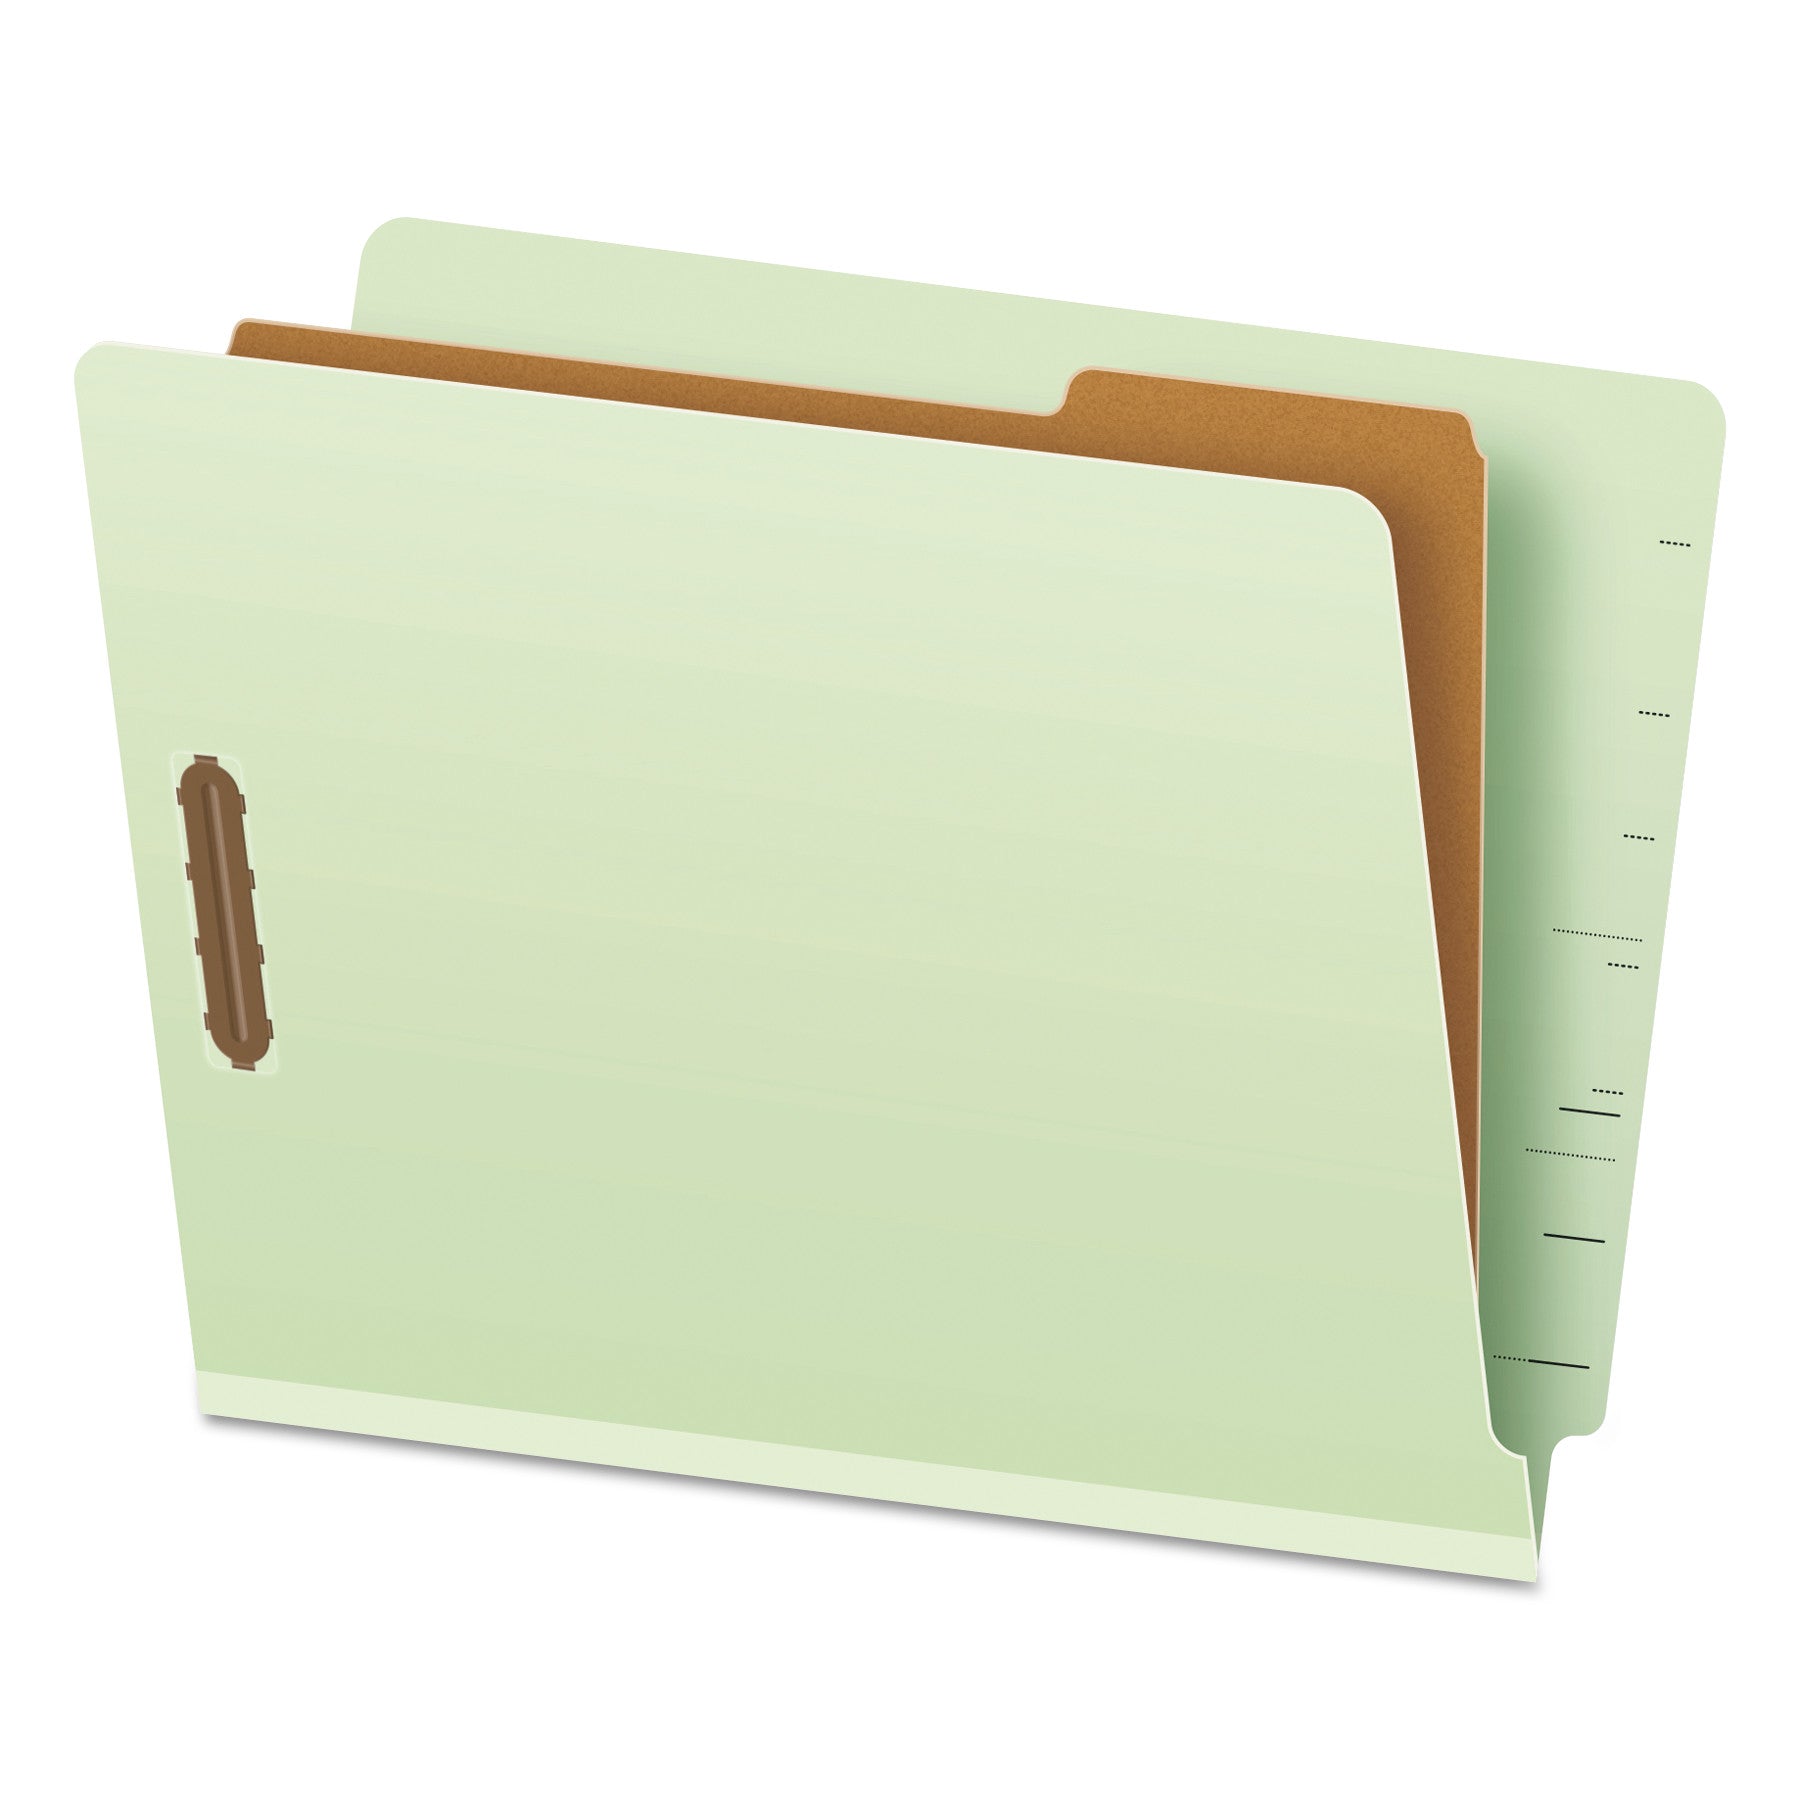 End Tab Classification Folders, 1.75" Expansion, 1 Divider, 4 Fasteners, Letter Size, Pale Green Exterior, 10/Box - 